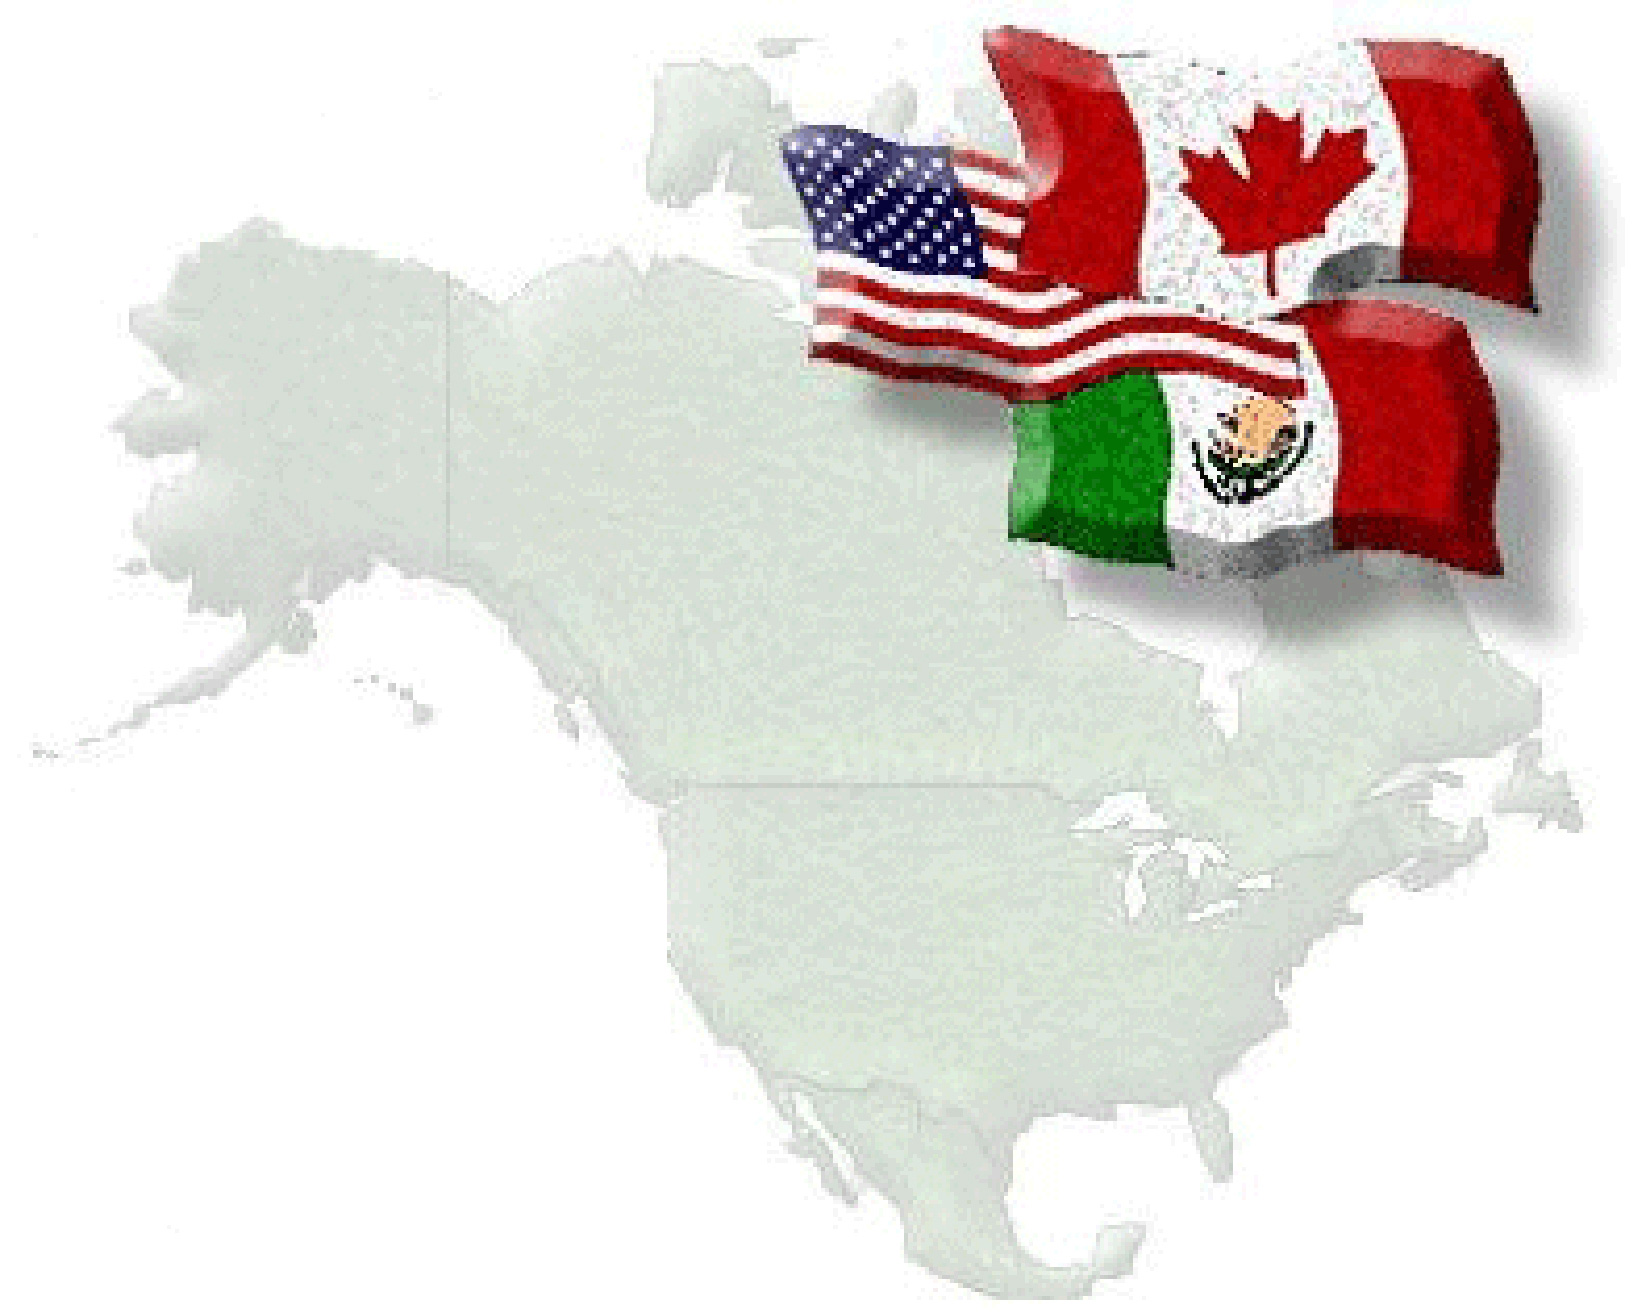 North American Free Trade Agreement (NAFTA) is ratified by the House of Representatives